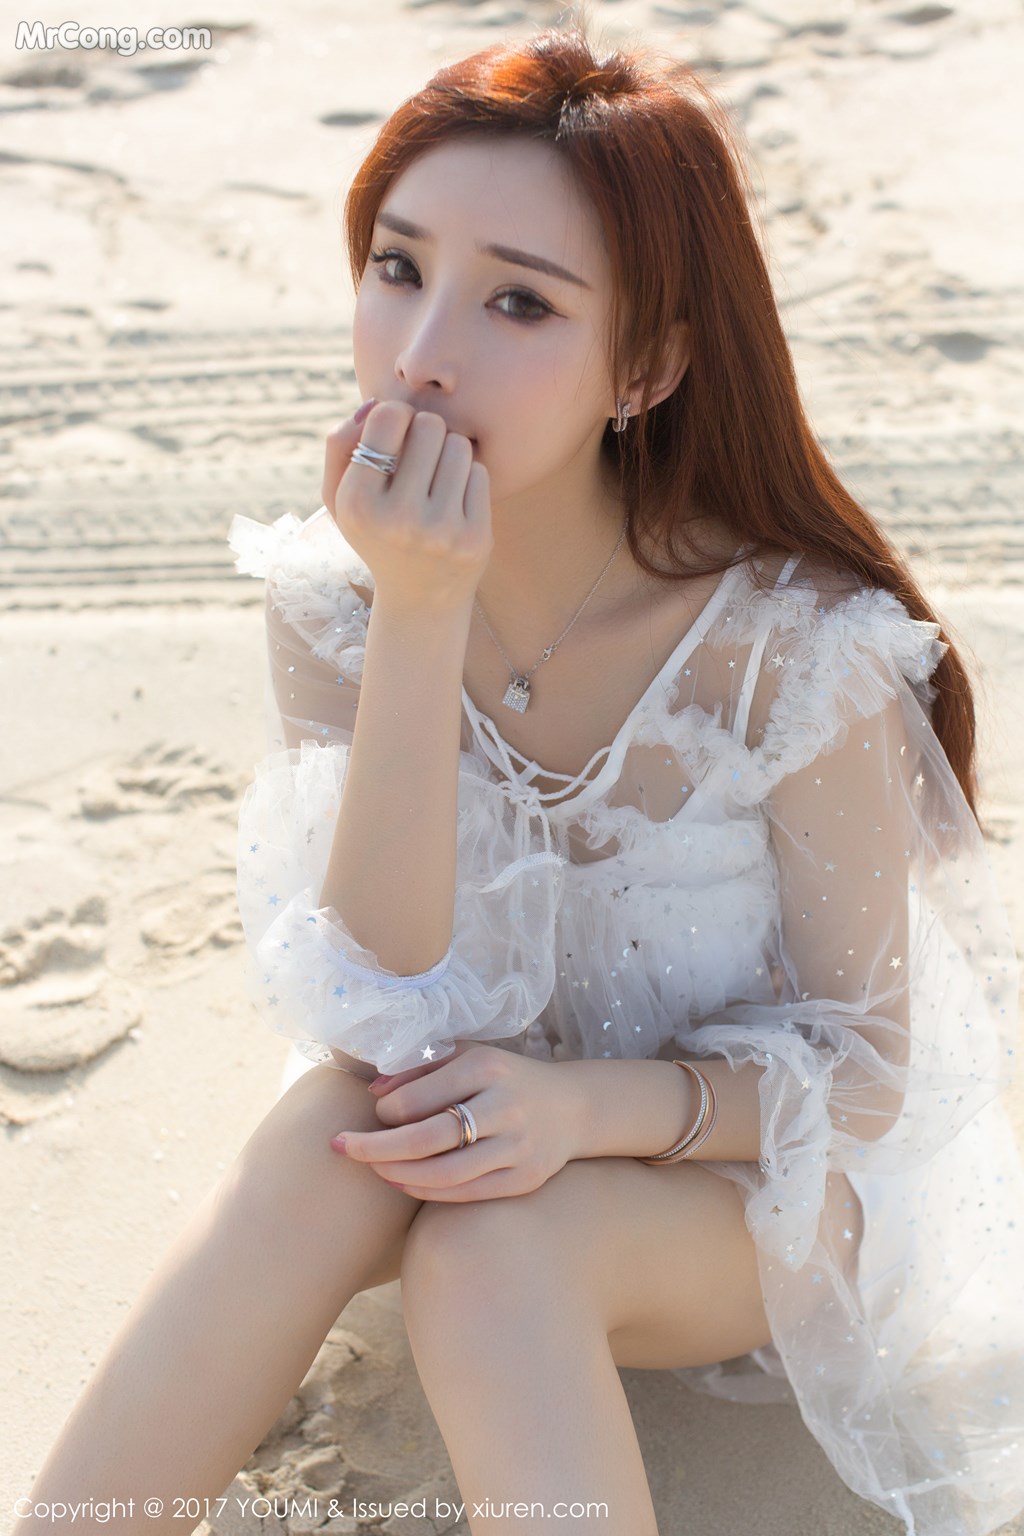 YouMi Vol.092: Model 土肥 圆 矮 挫 穷 (45 pictures) photo 1-3